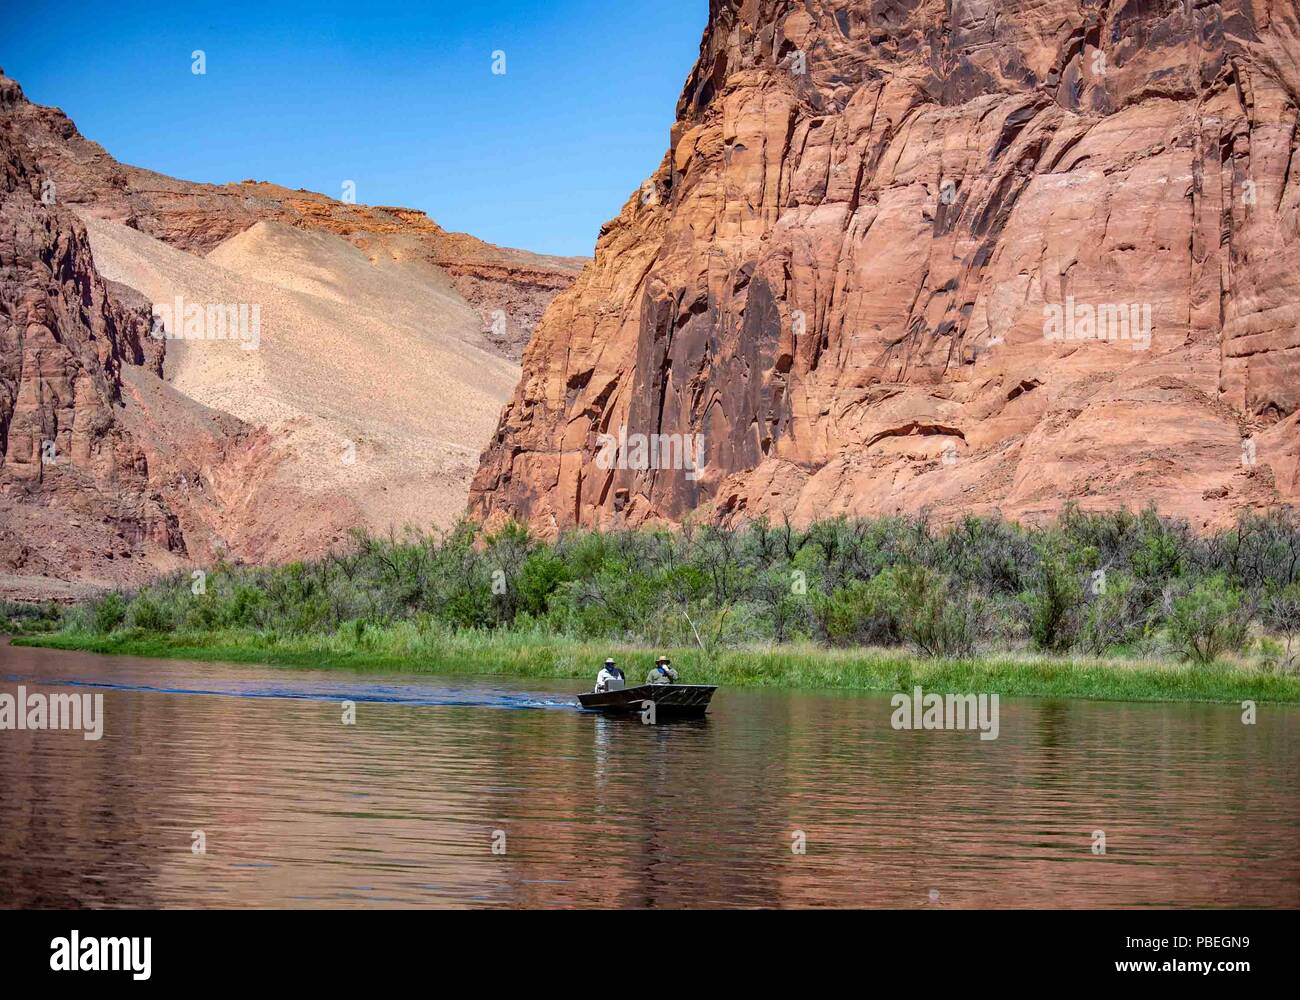 June 1, 2018 - Arizona & Utah, US - Power boats among the spectacular Glen Canyon towering geological formations. Part of the immense canyon system carved by the Colorado River in Arizona and Utah, it is popular with tourists and vacationers for river rafting and float trips, and for its striking scenic beauty. Credit: Arnold Drapkin/ZUMA Wire/Alamy Live News Stock Photo